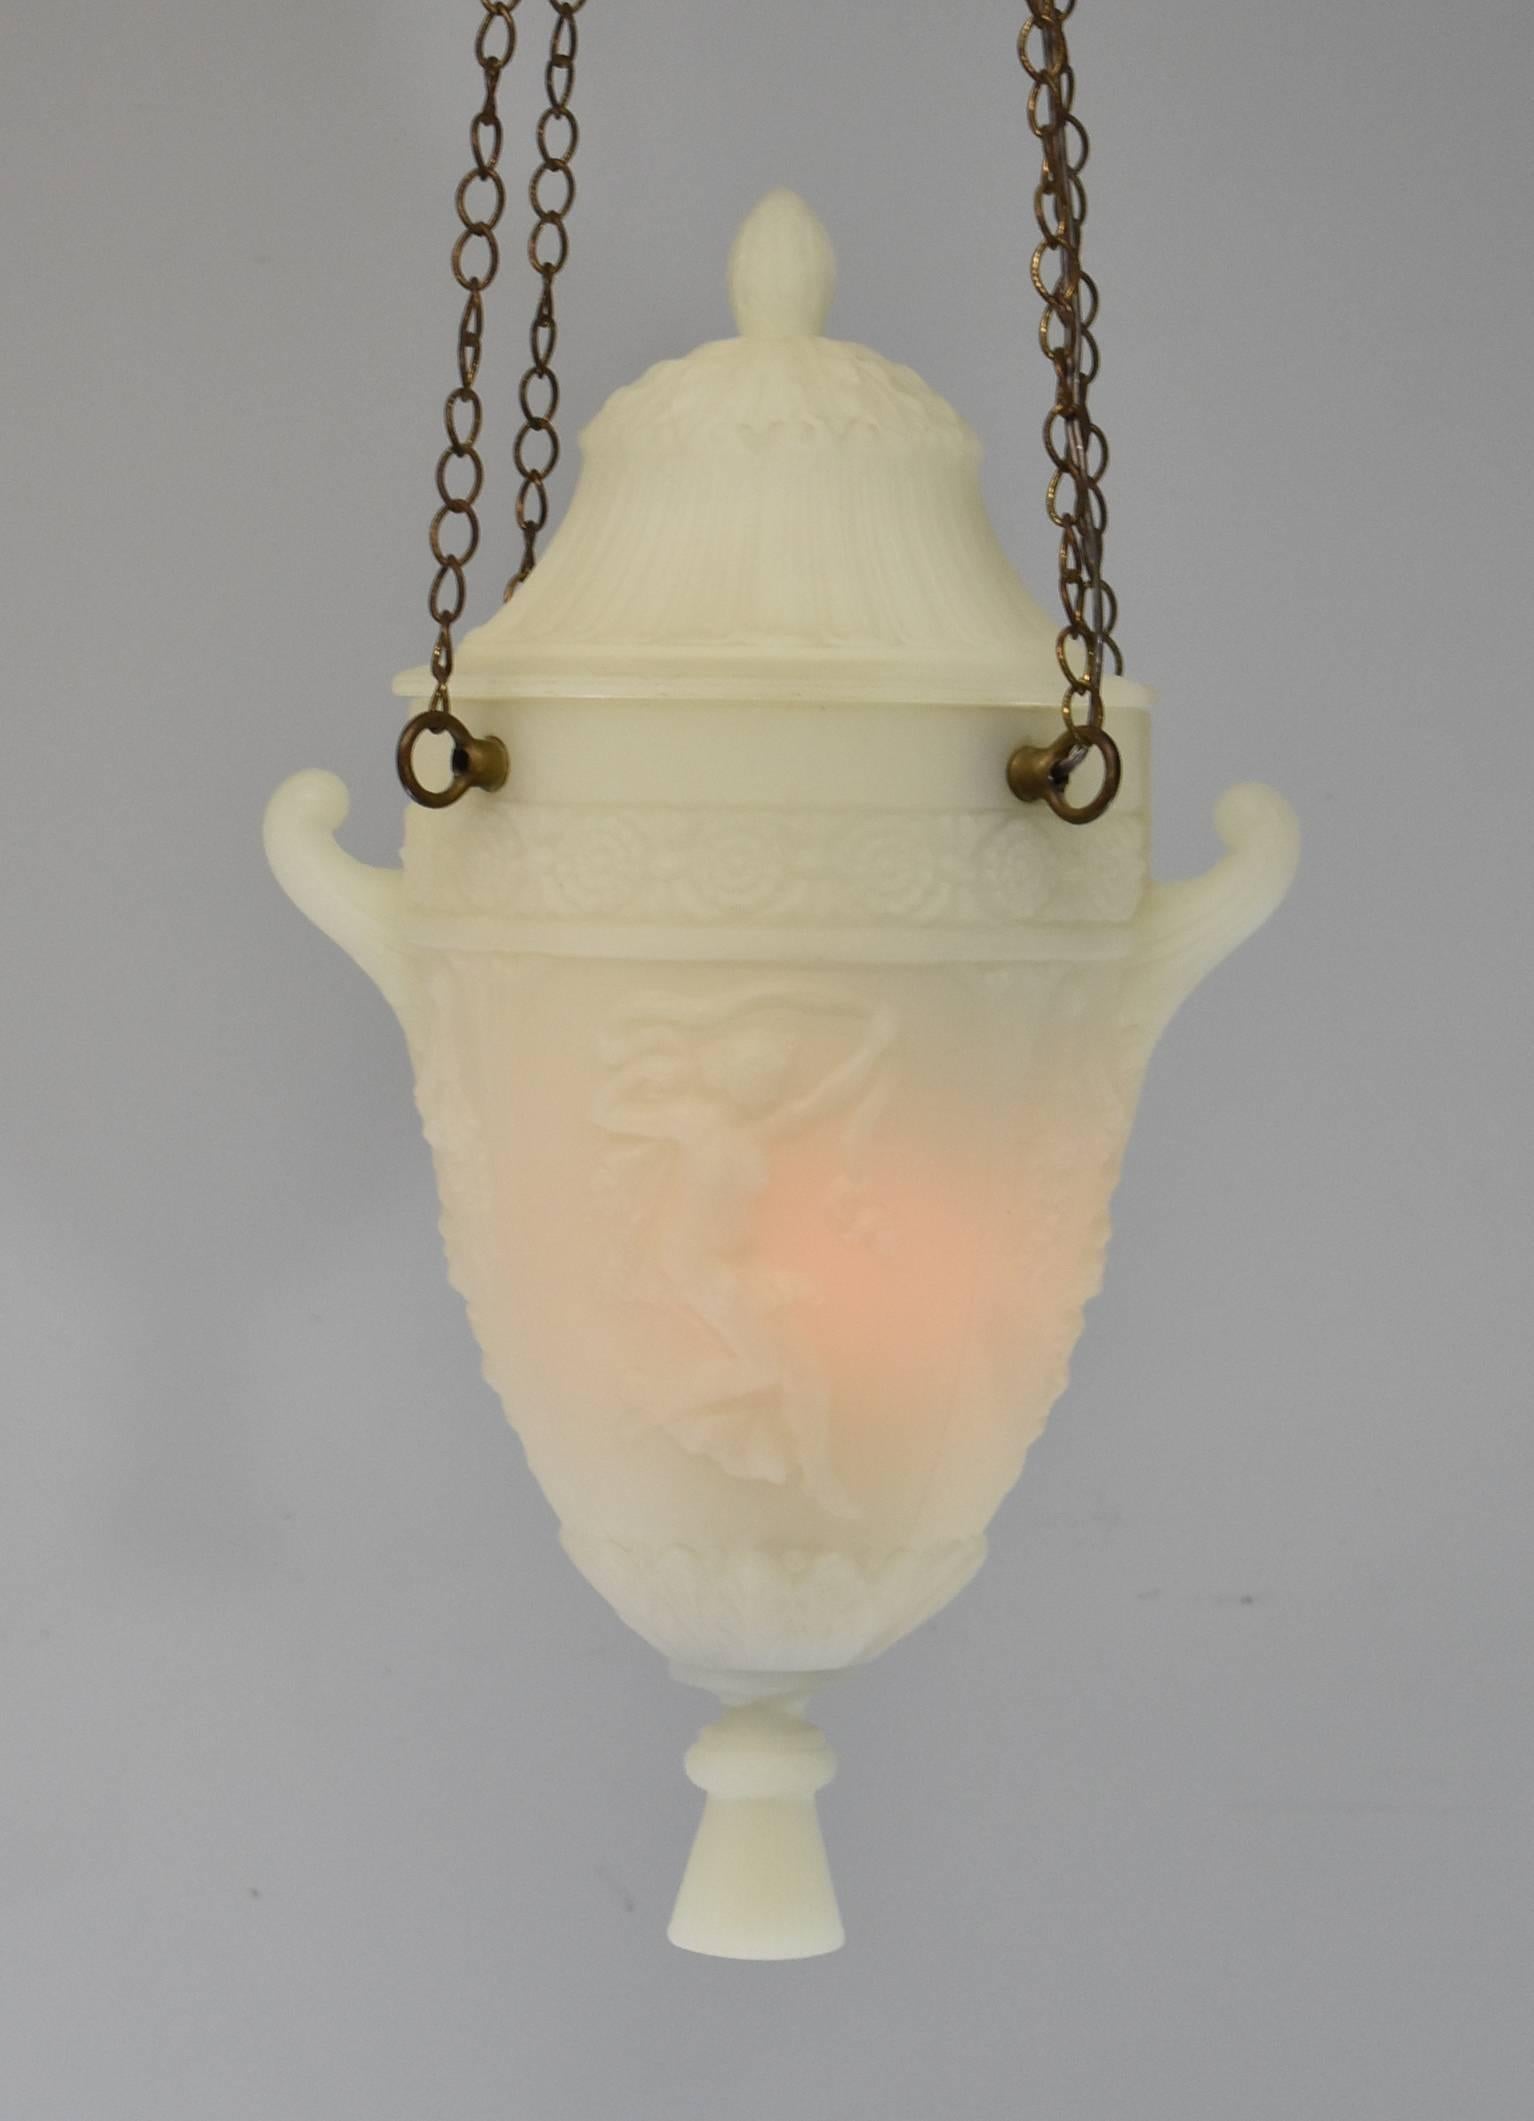 A beautiful white frosted Grecian urn style chandelier. Suspended from four chains this gorgeous light fixture features two handles with floral detail, Greek female figures and fluted panels with anthicus leaves. Casted glass with a removable lid.